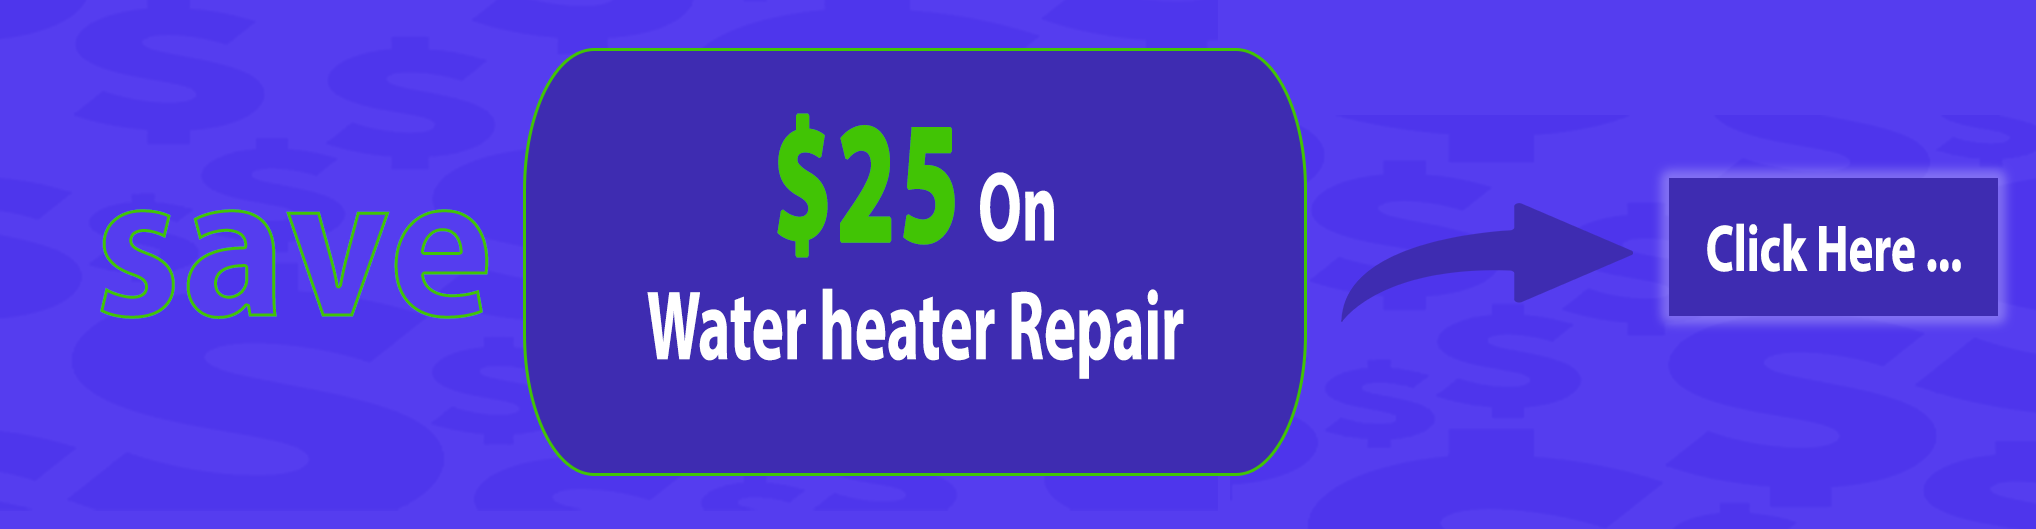 Mesquite Water Heater Offer Image